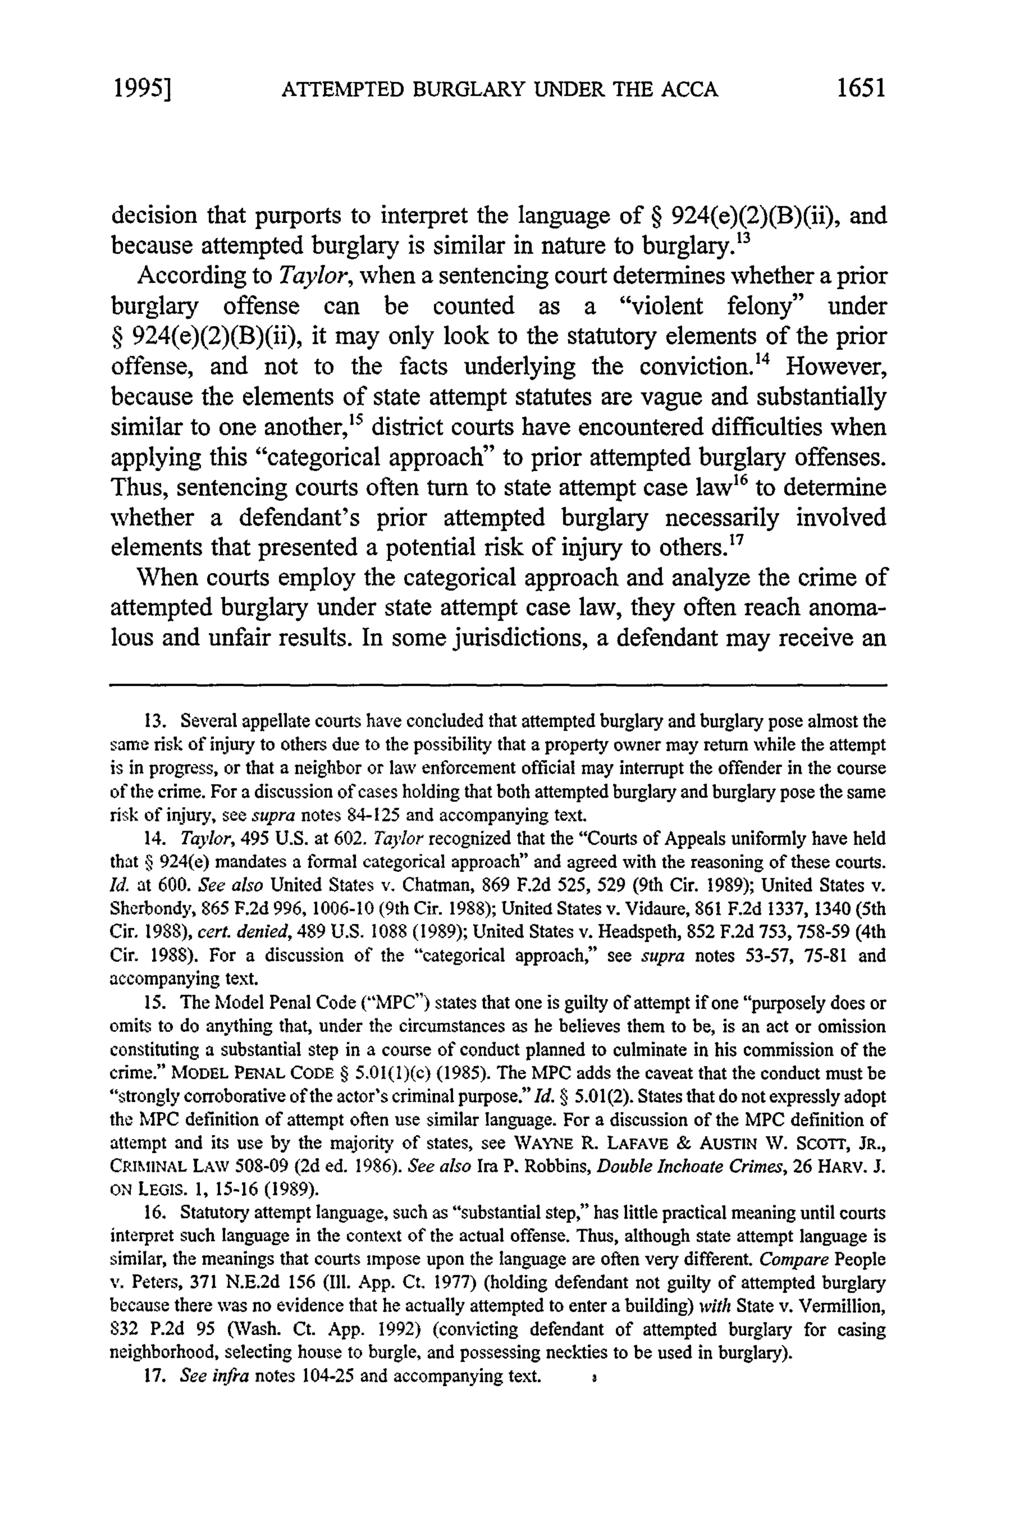 1995] ATTEMPTED BURGLARY UNDER THE ACCA 1651 decision that purports to interpret the language of 924(e)(2)(B)(ii), and because attempted burglary is similar in nature to burglary.